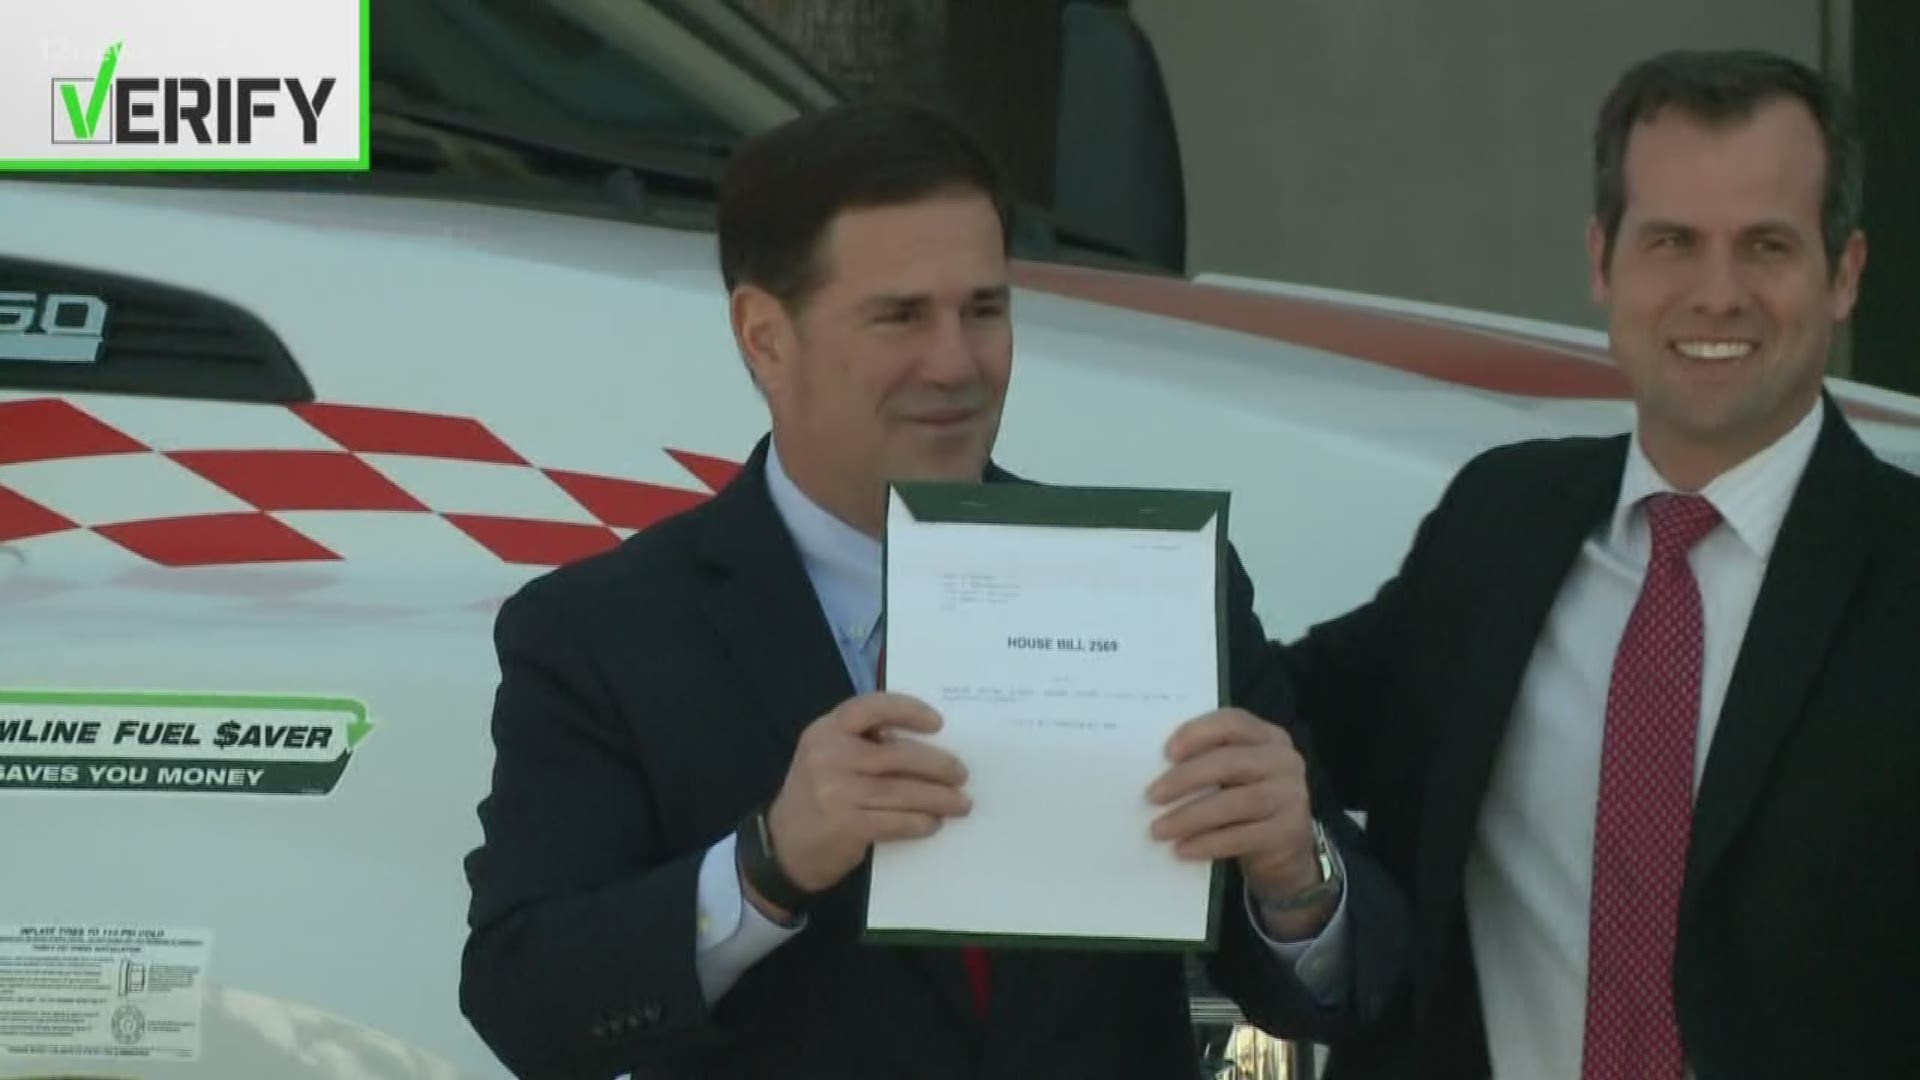 Gov. Doug Ducey signed legislation Wednesday making the state the first in the nation to automatically grant occupational licenses to anyone who moves there with an unblemished credential from another state.